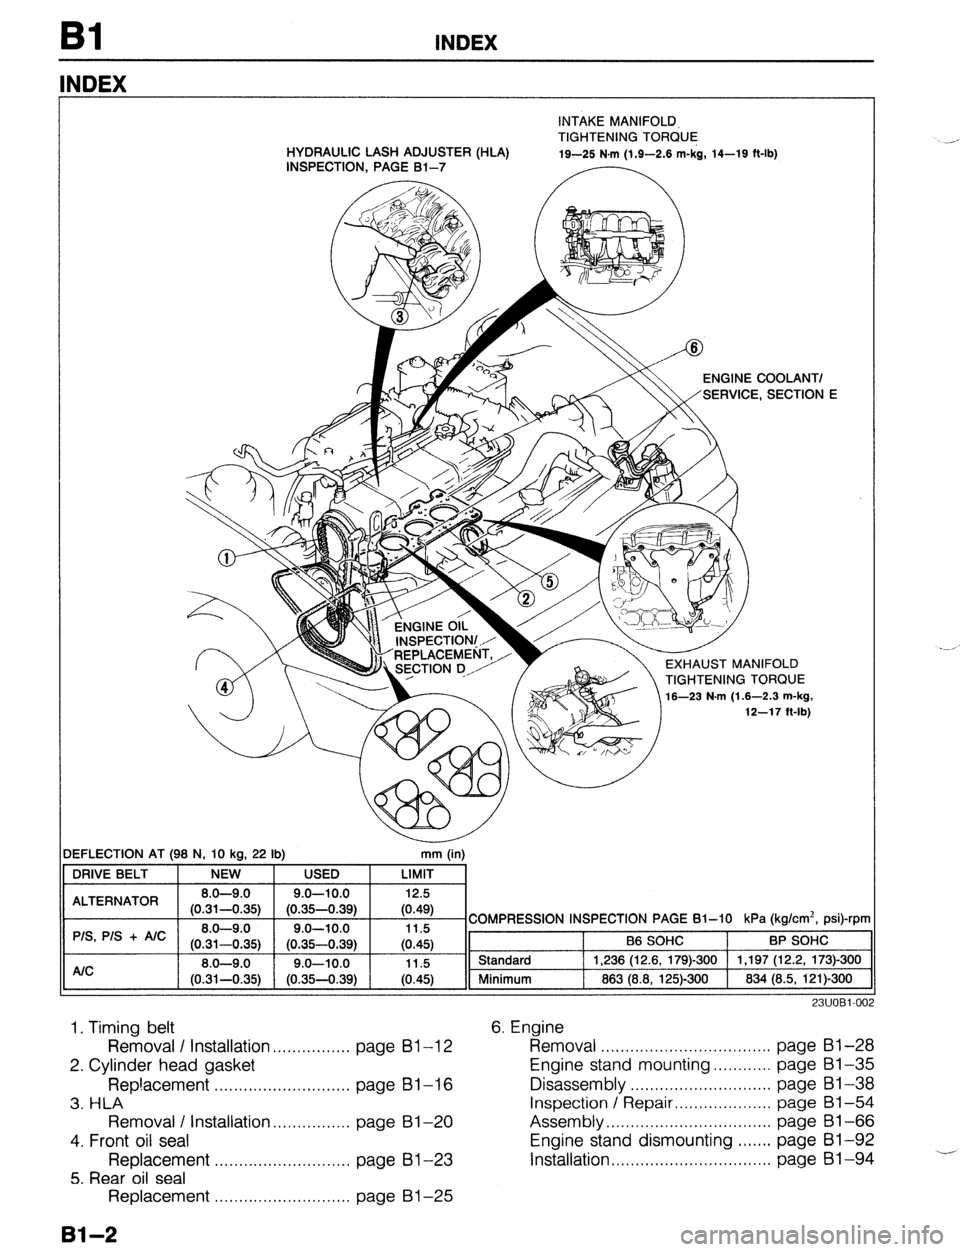 MAZDA PROTEGE 1992 Owners Guide INDEX 
NDEX 
INTAKE MANIFOLD, 
TIGHTENING TORQUE 
.-’ HYDRAULIC LASH ADJUSTER (HLA) 
INSPECTION, PAGE Bl-7 19-25 N.m (1.9-2.6 m-kg, 14-19 ft-lb) 
DEFLECTION AT (98 N, 10 kc 
19 
22 lb) 
r “Y7 ENGI